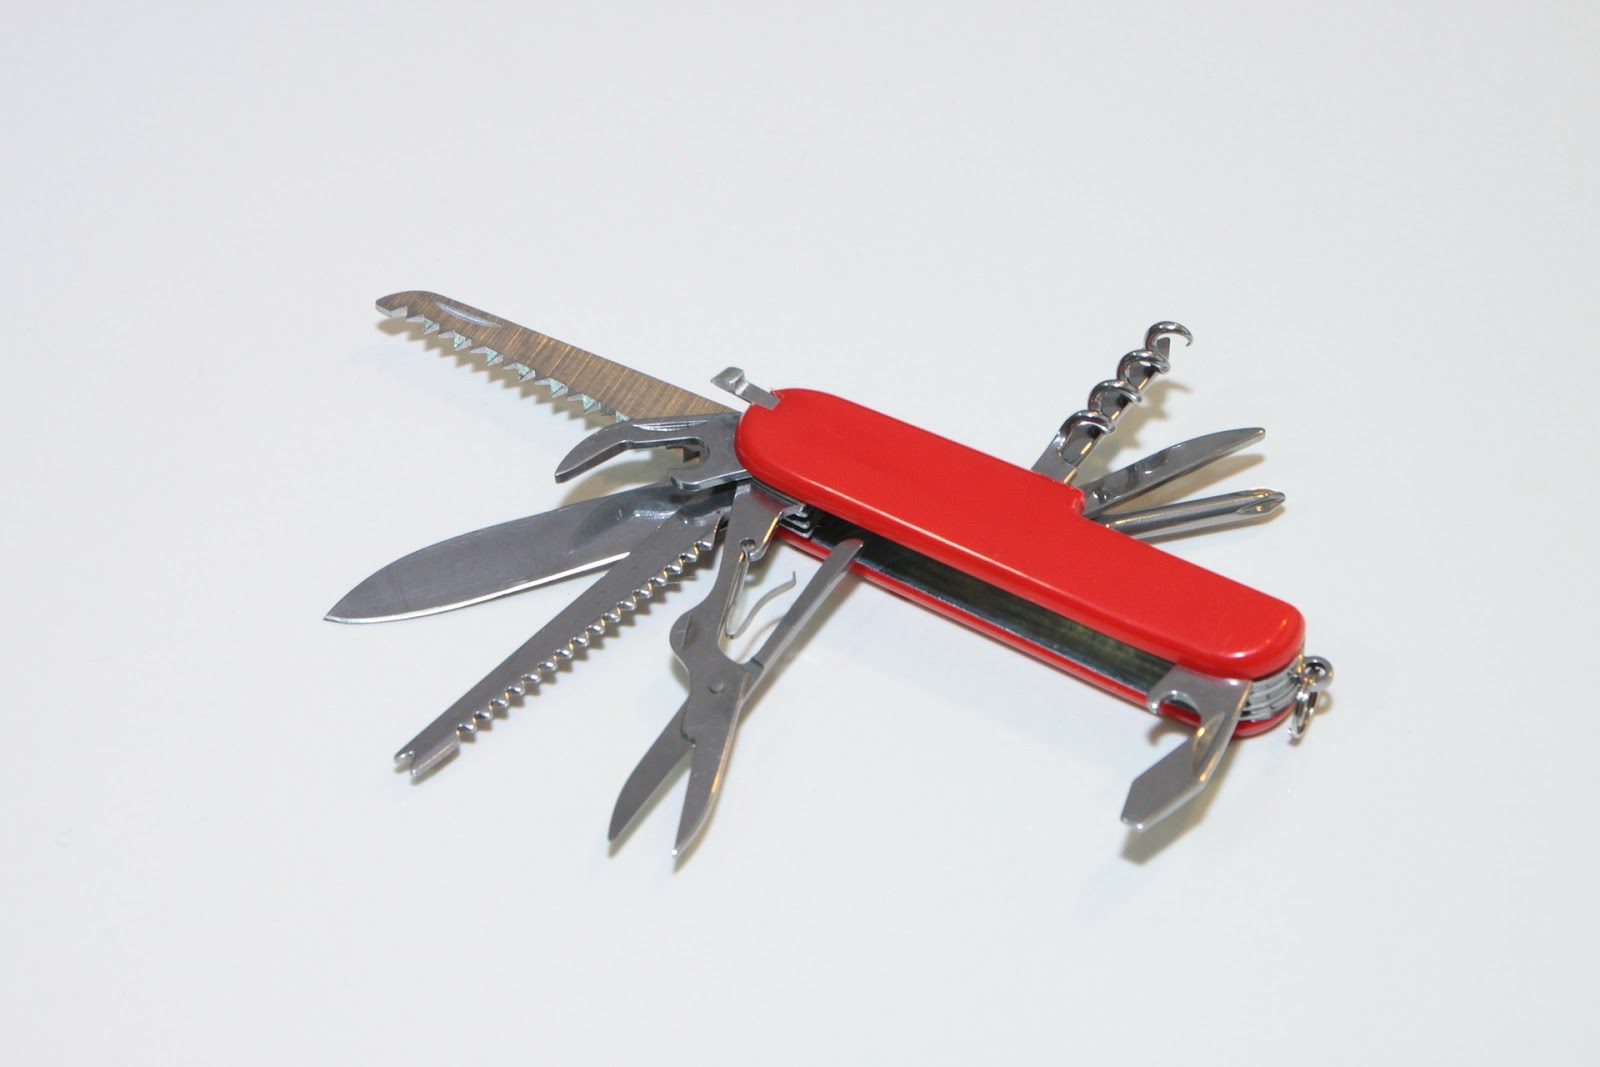 A picture of a Swiss army knife with all the attachments open.